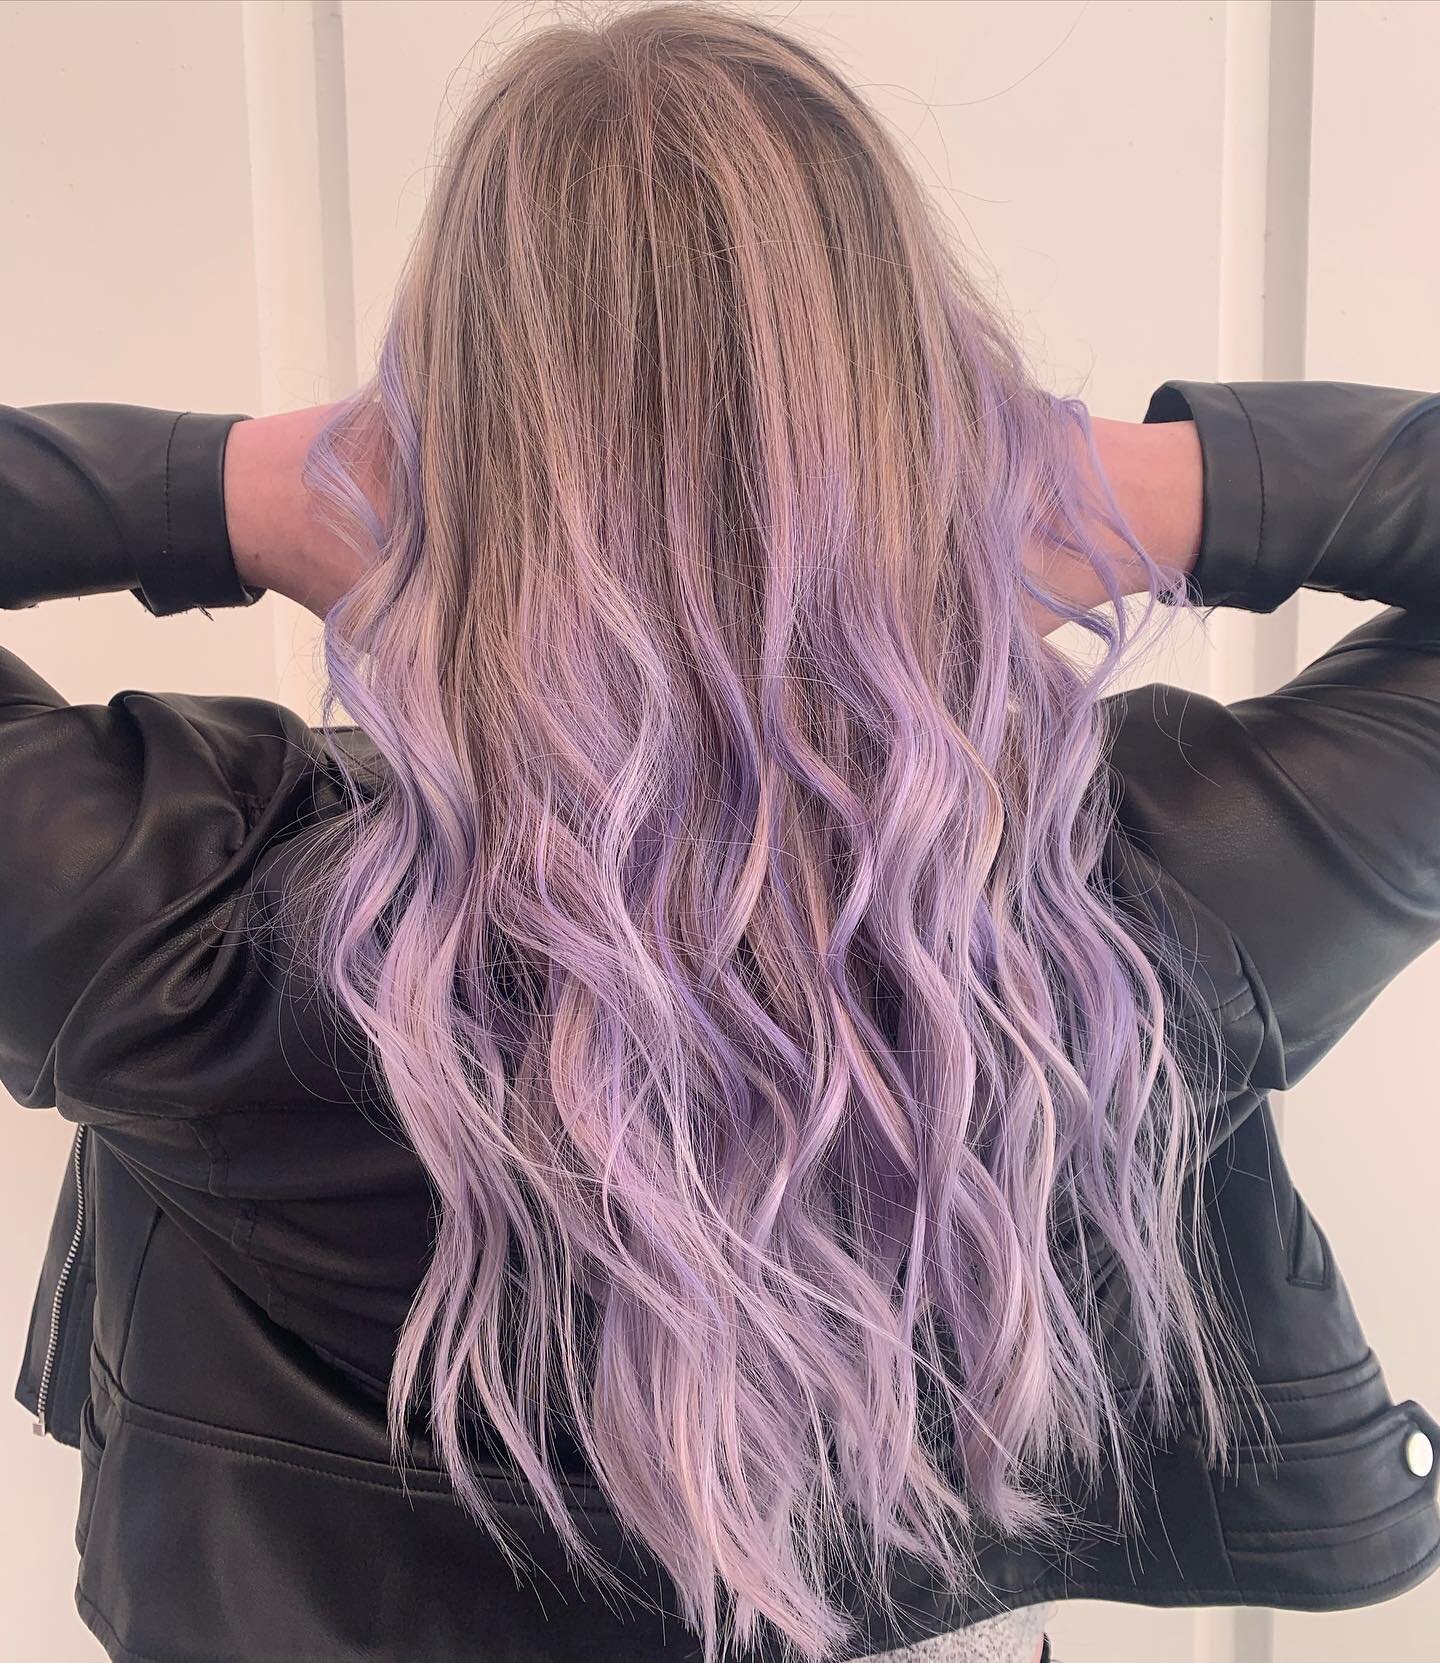 Lilac dreams 💜 done by Kathleen